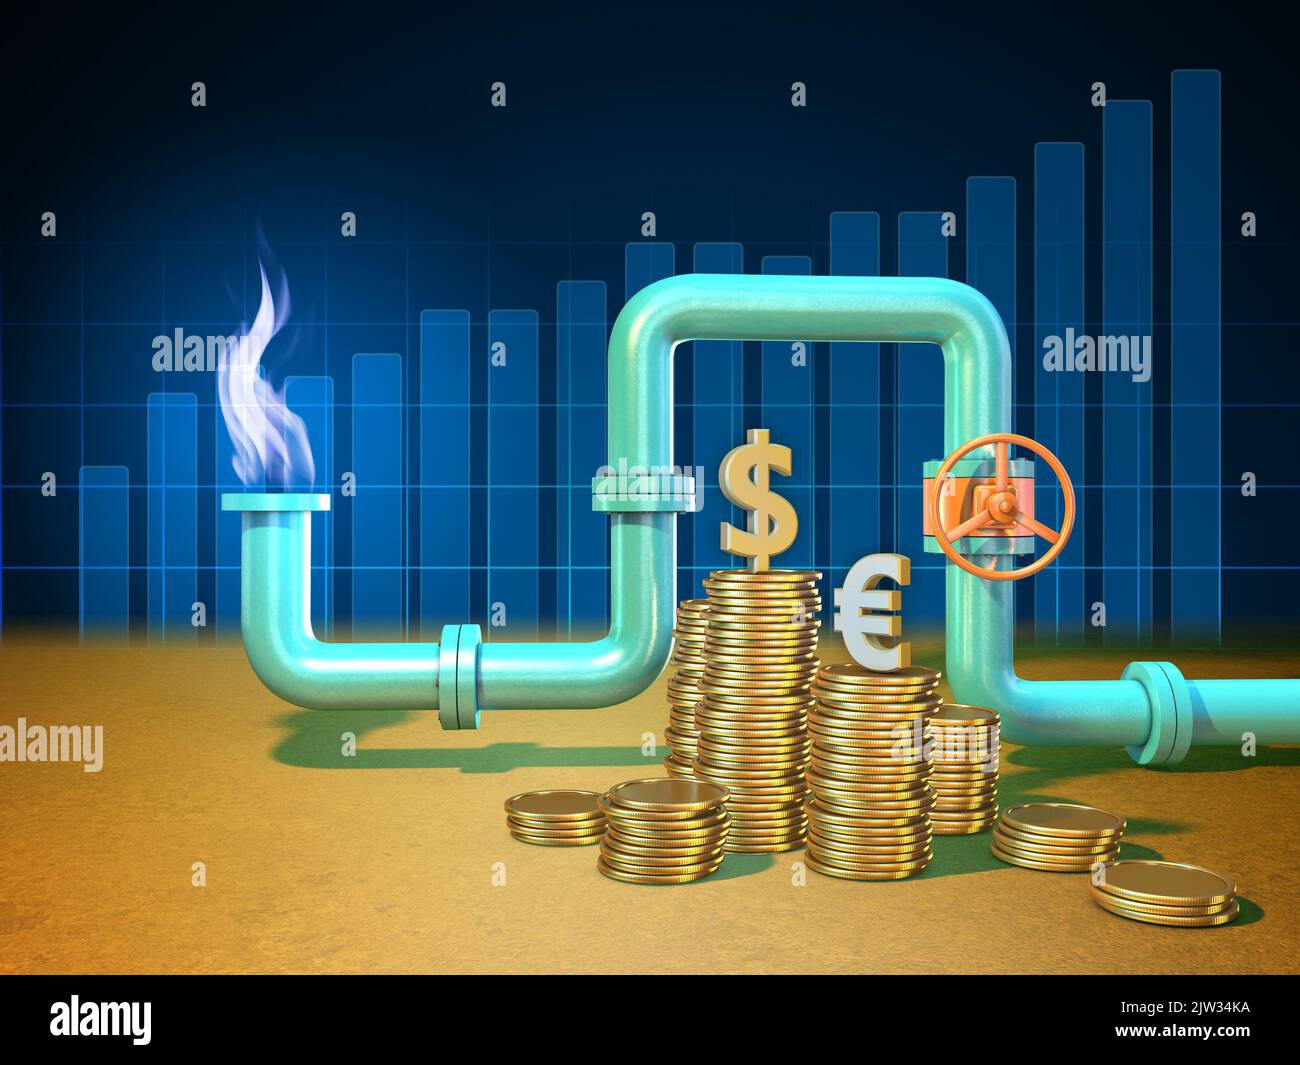 Gas pipes and a stack of coin with currency simbols. Digital illustration. Stock Photo